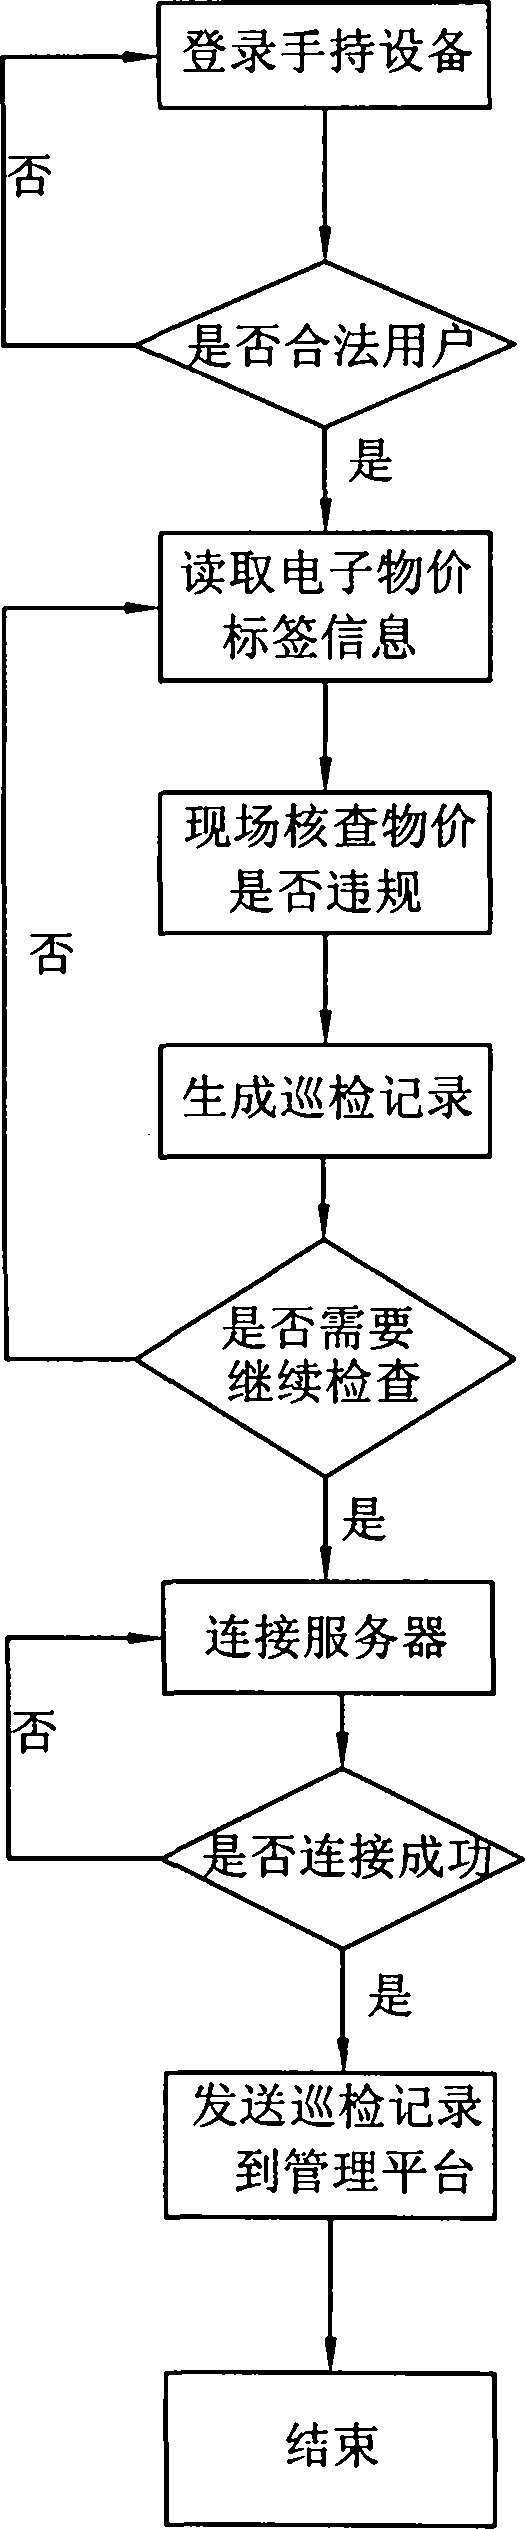 Routing inspection method for commodity price supervision